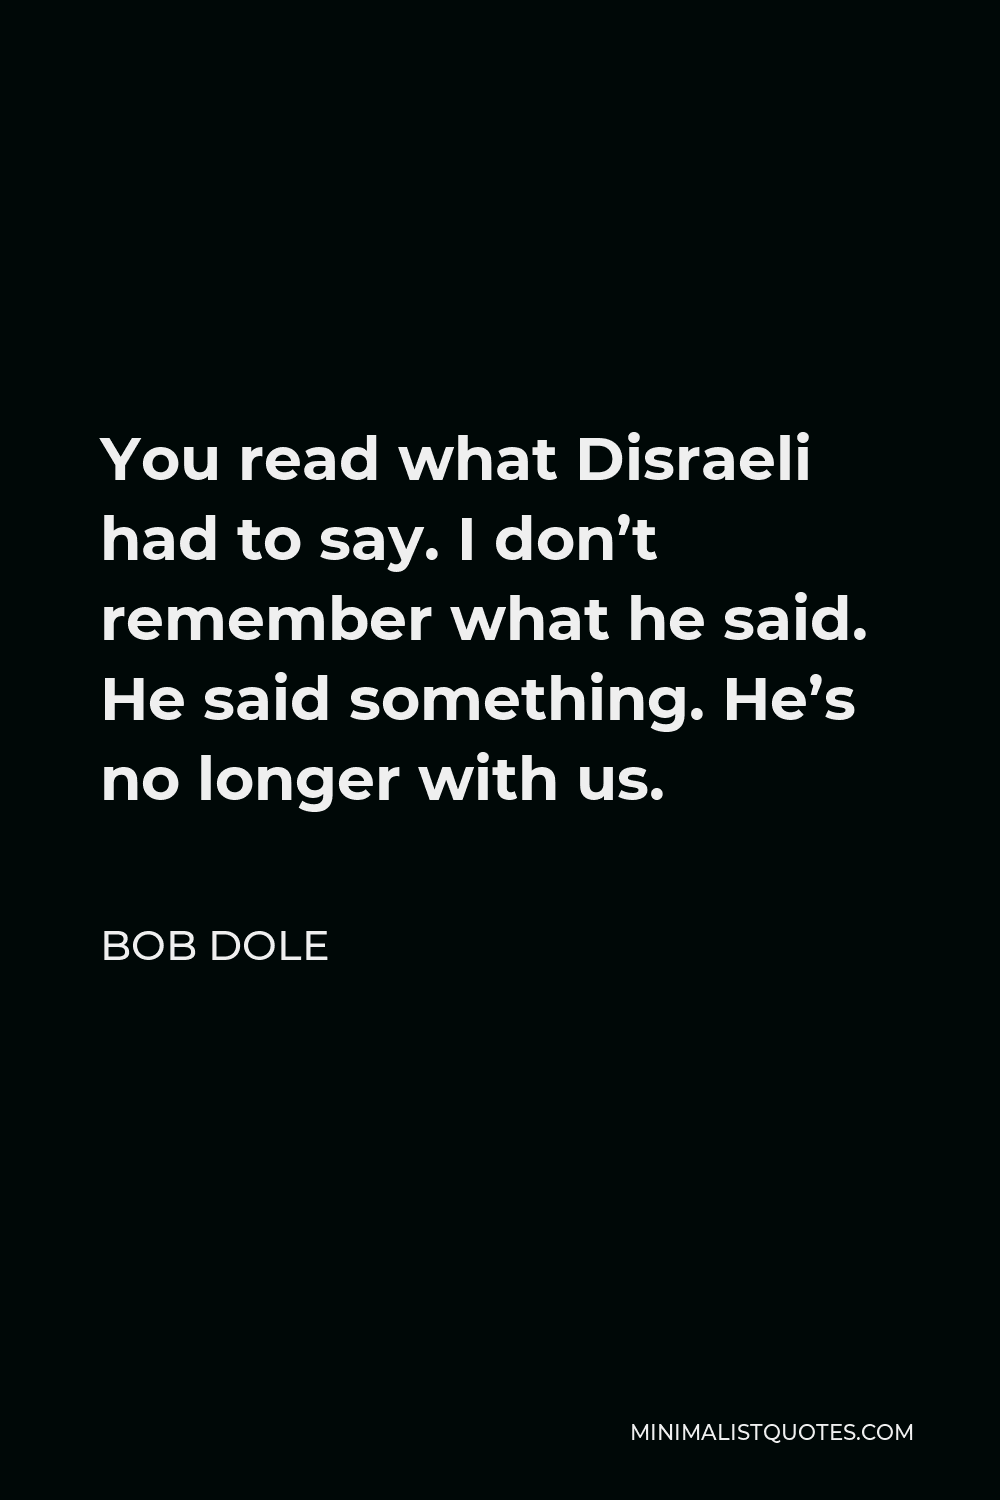 Bob Dole Quote - You read what Disraeli had to say. I don’t remember what he said. He said something. He’s no longer with us.